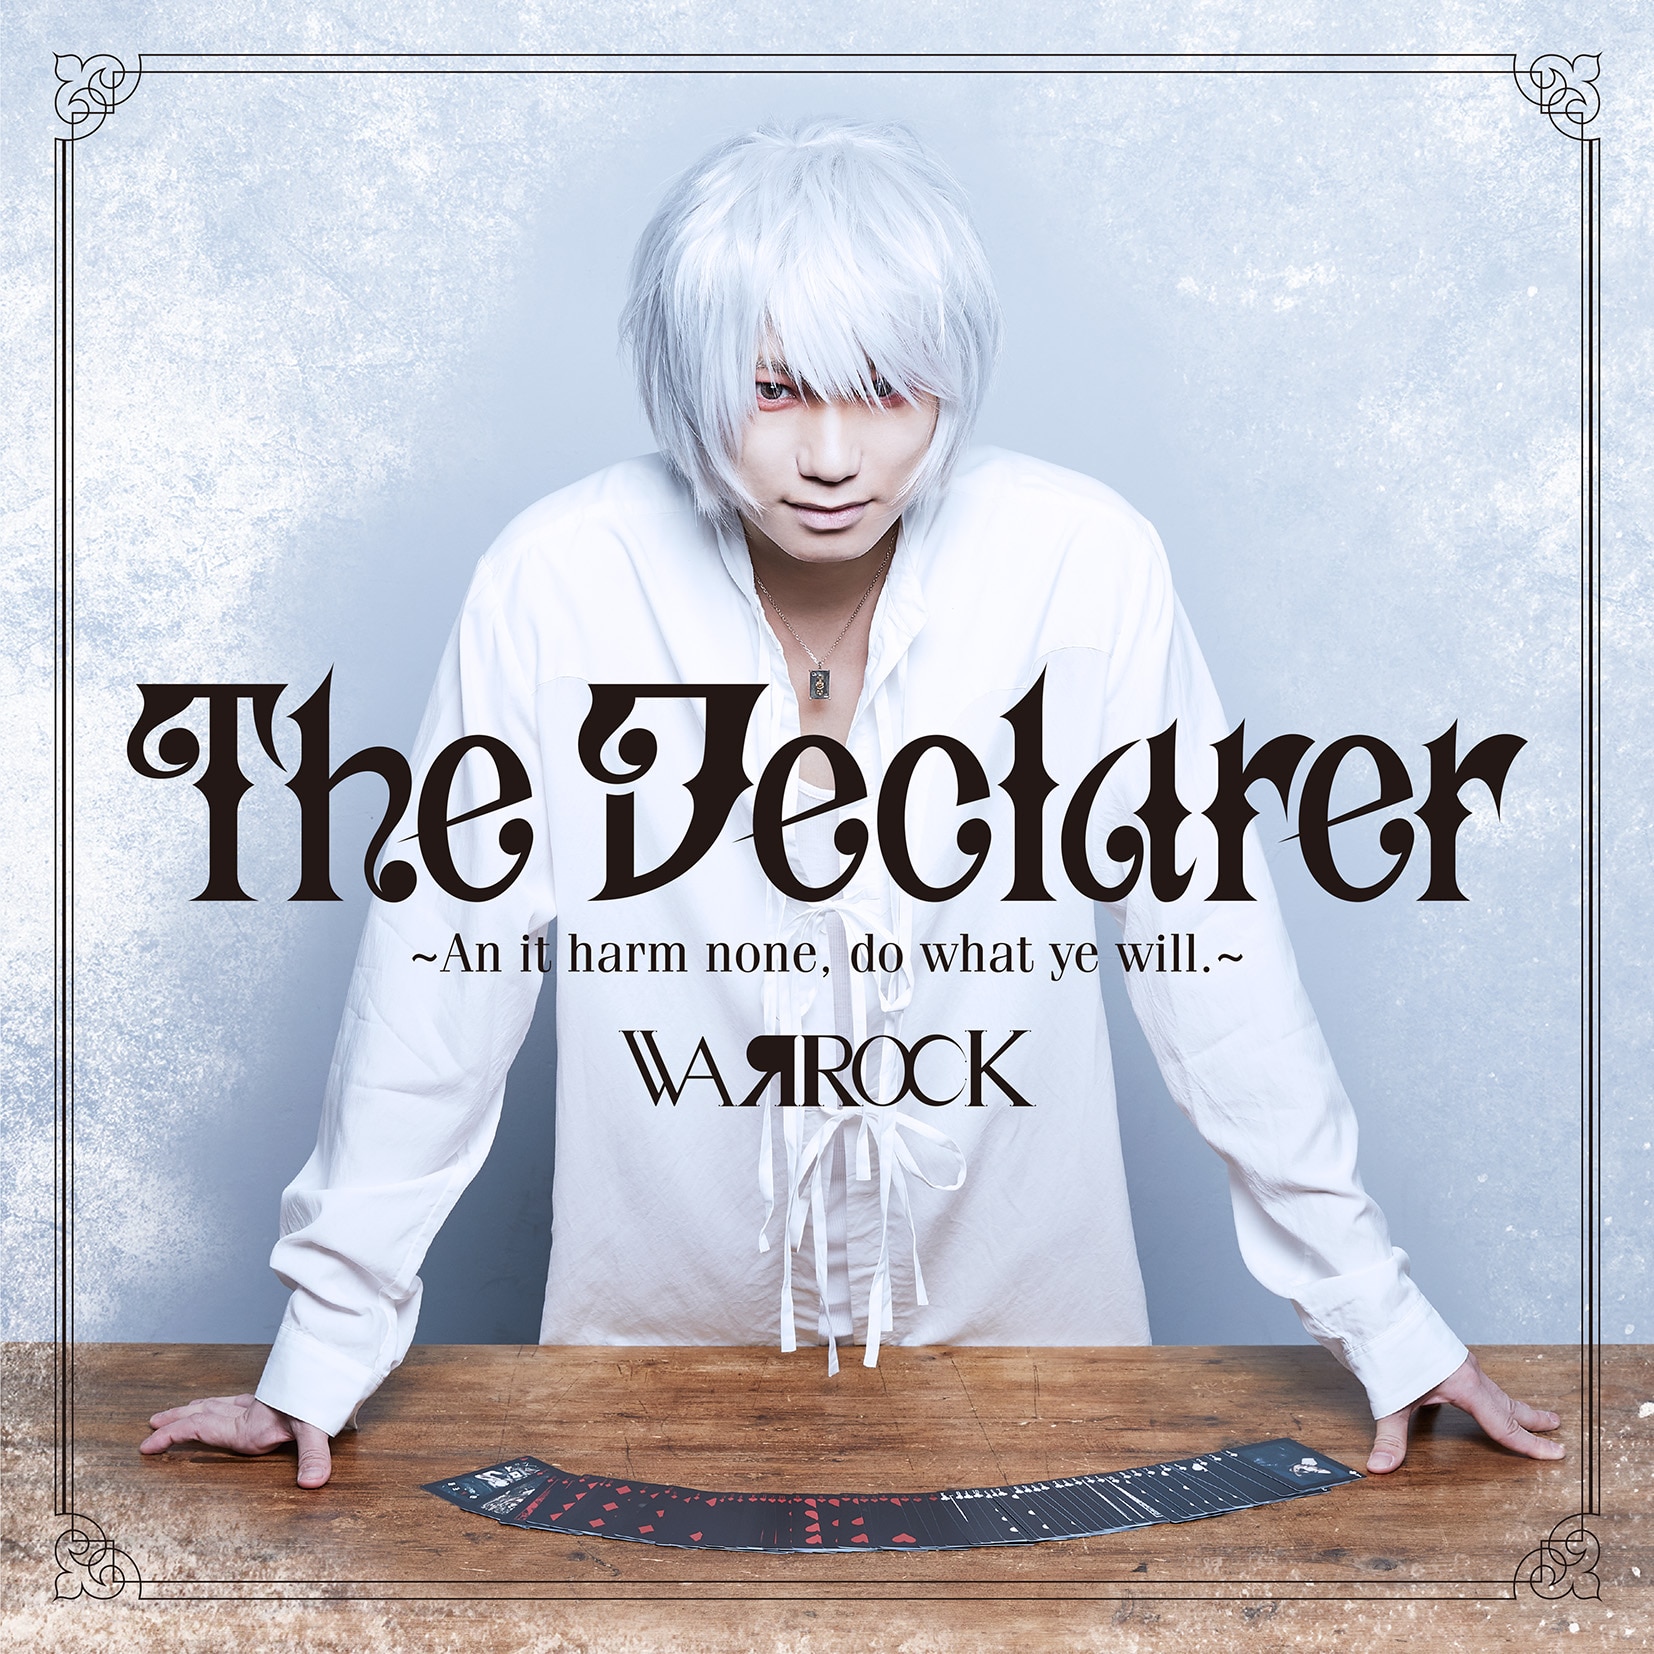 The Declarer ~An it  harm none, do what ye will.~